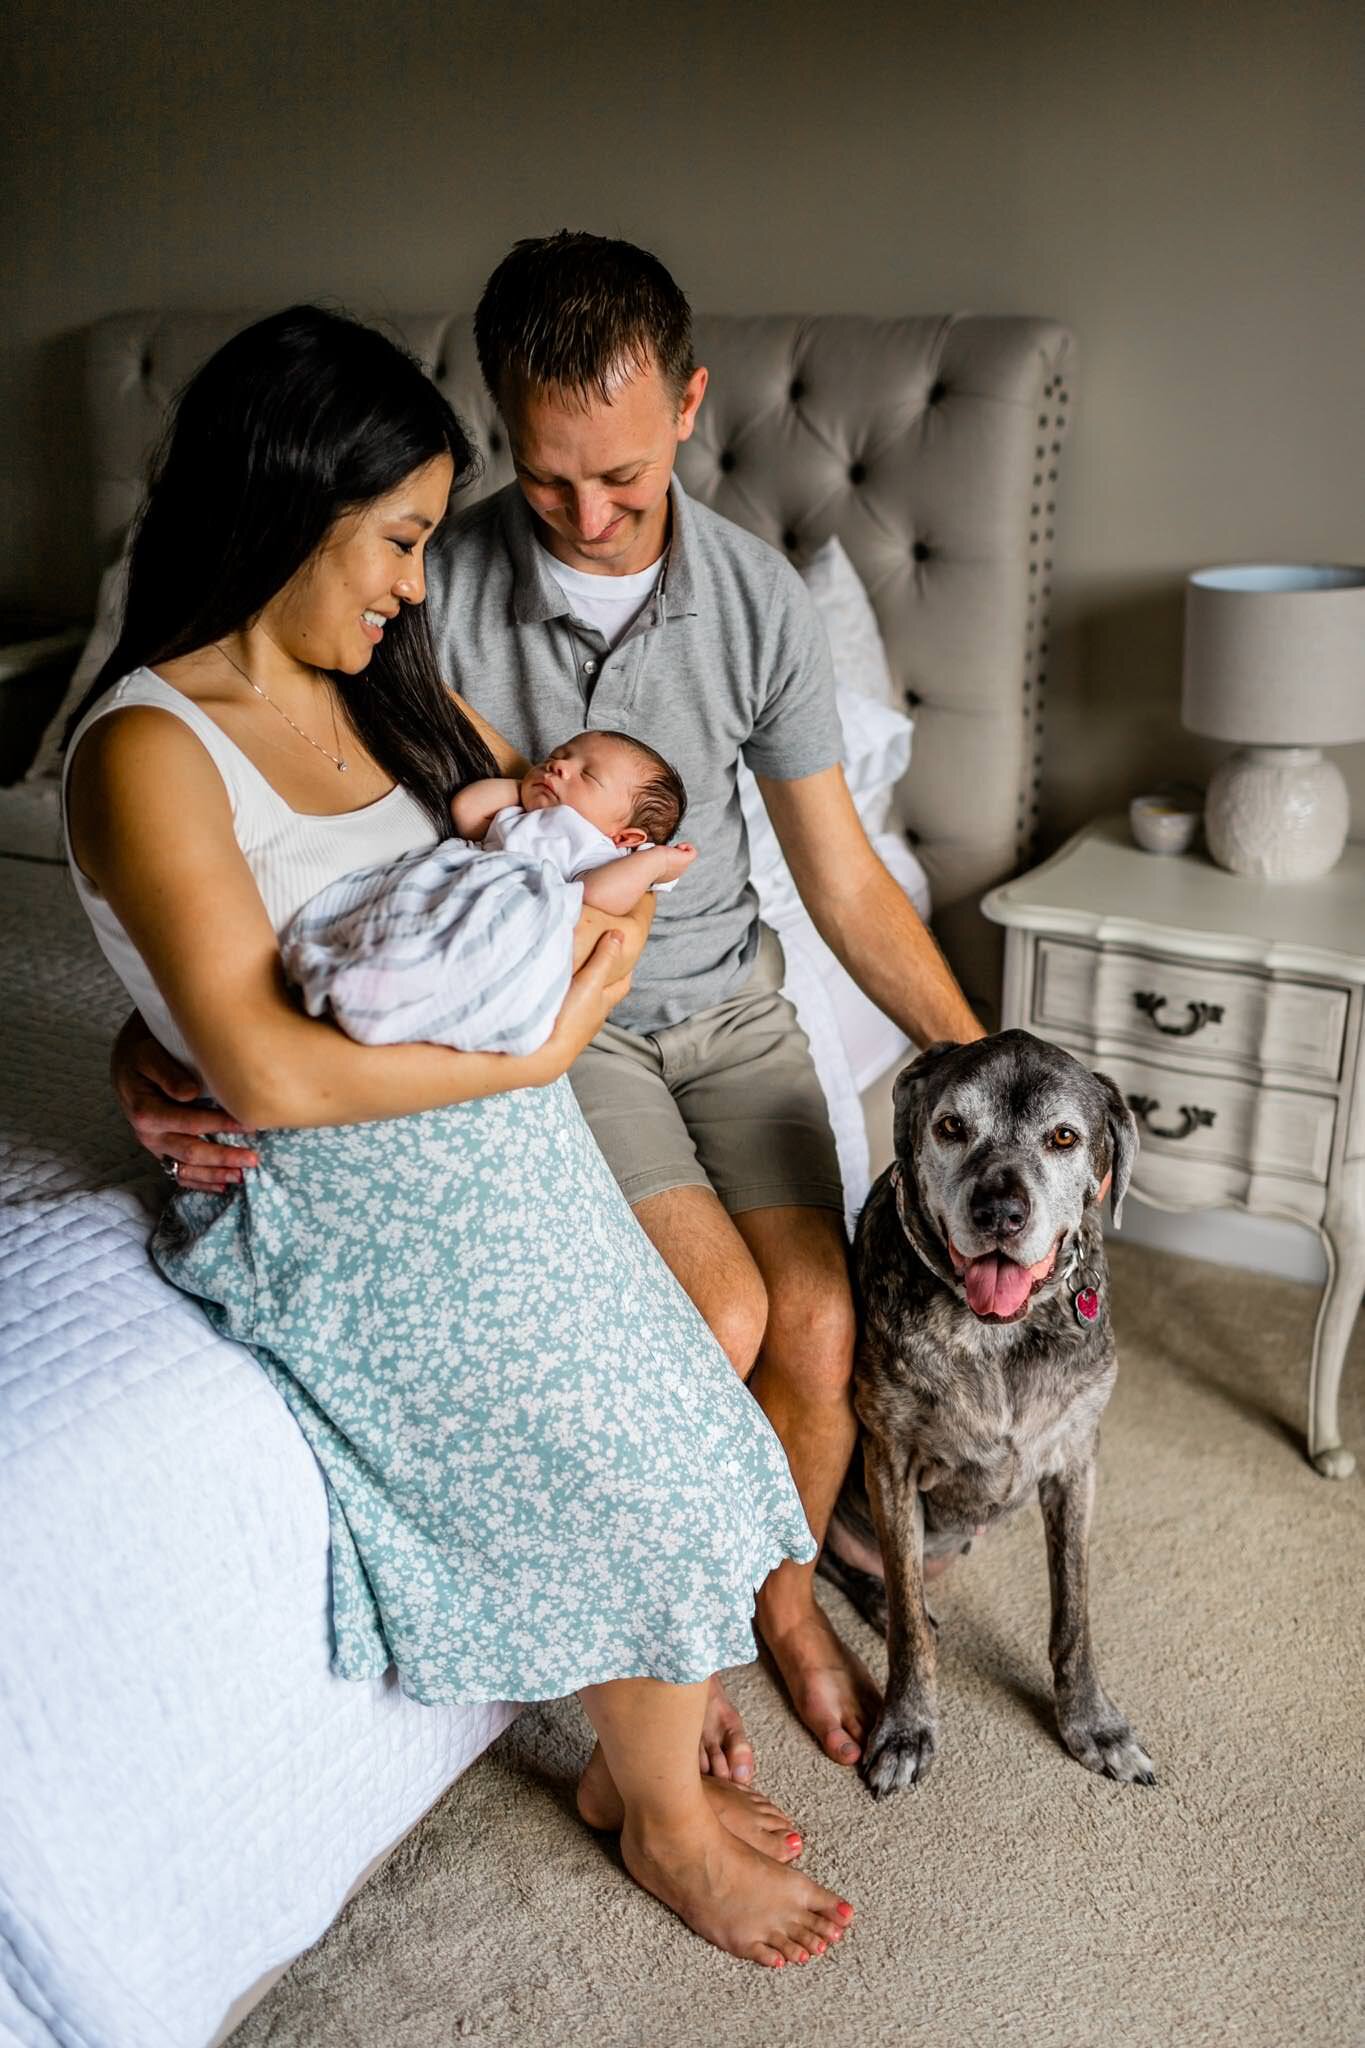 Family sitting on bed and smiling with newborn baby | Durham Newborn Photographer | By G. Lin Photography